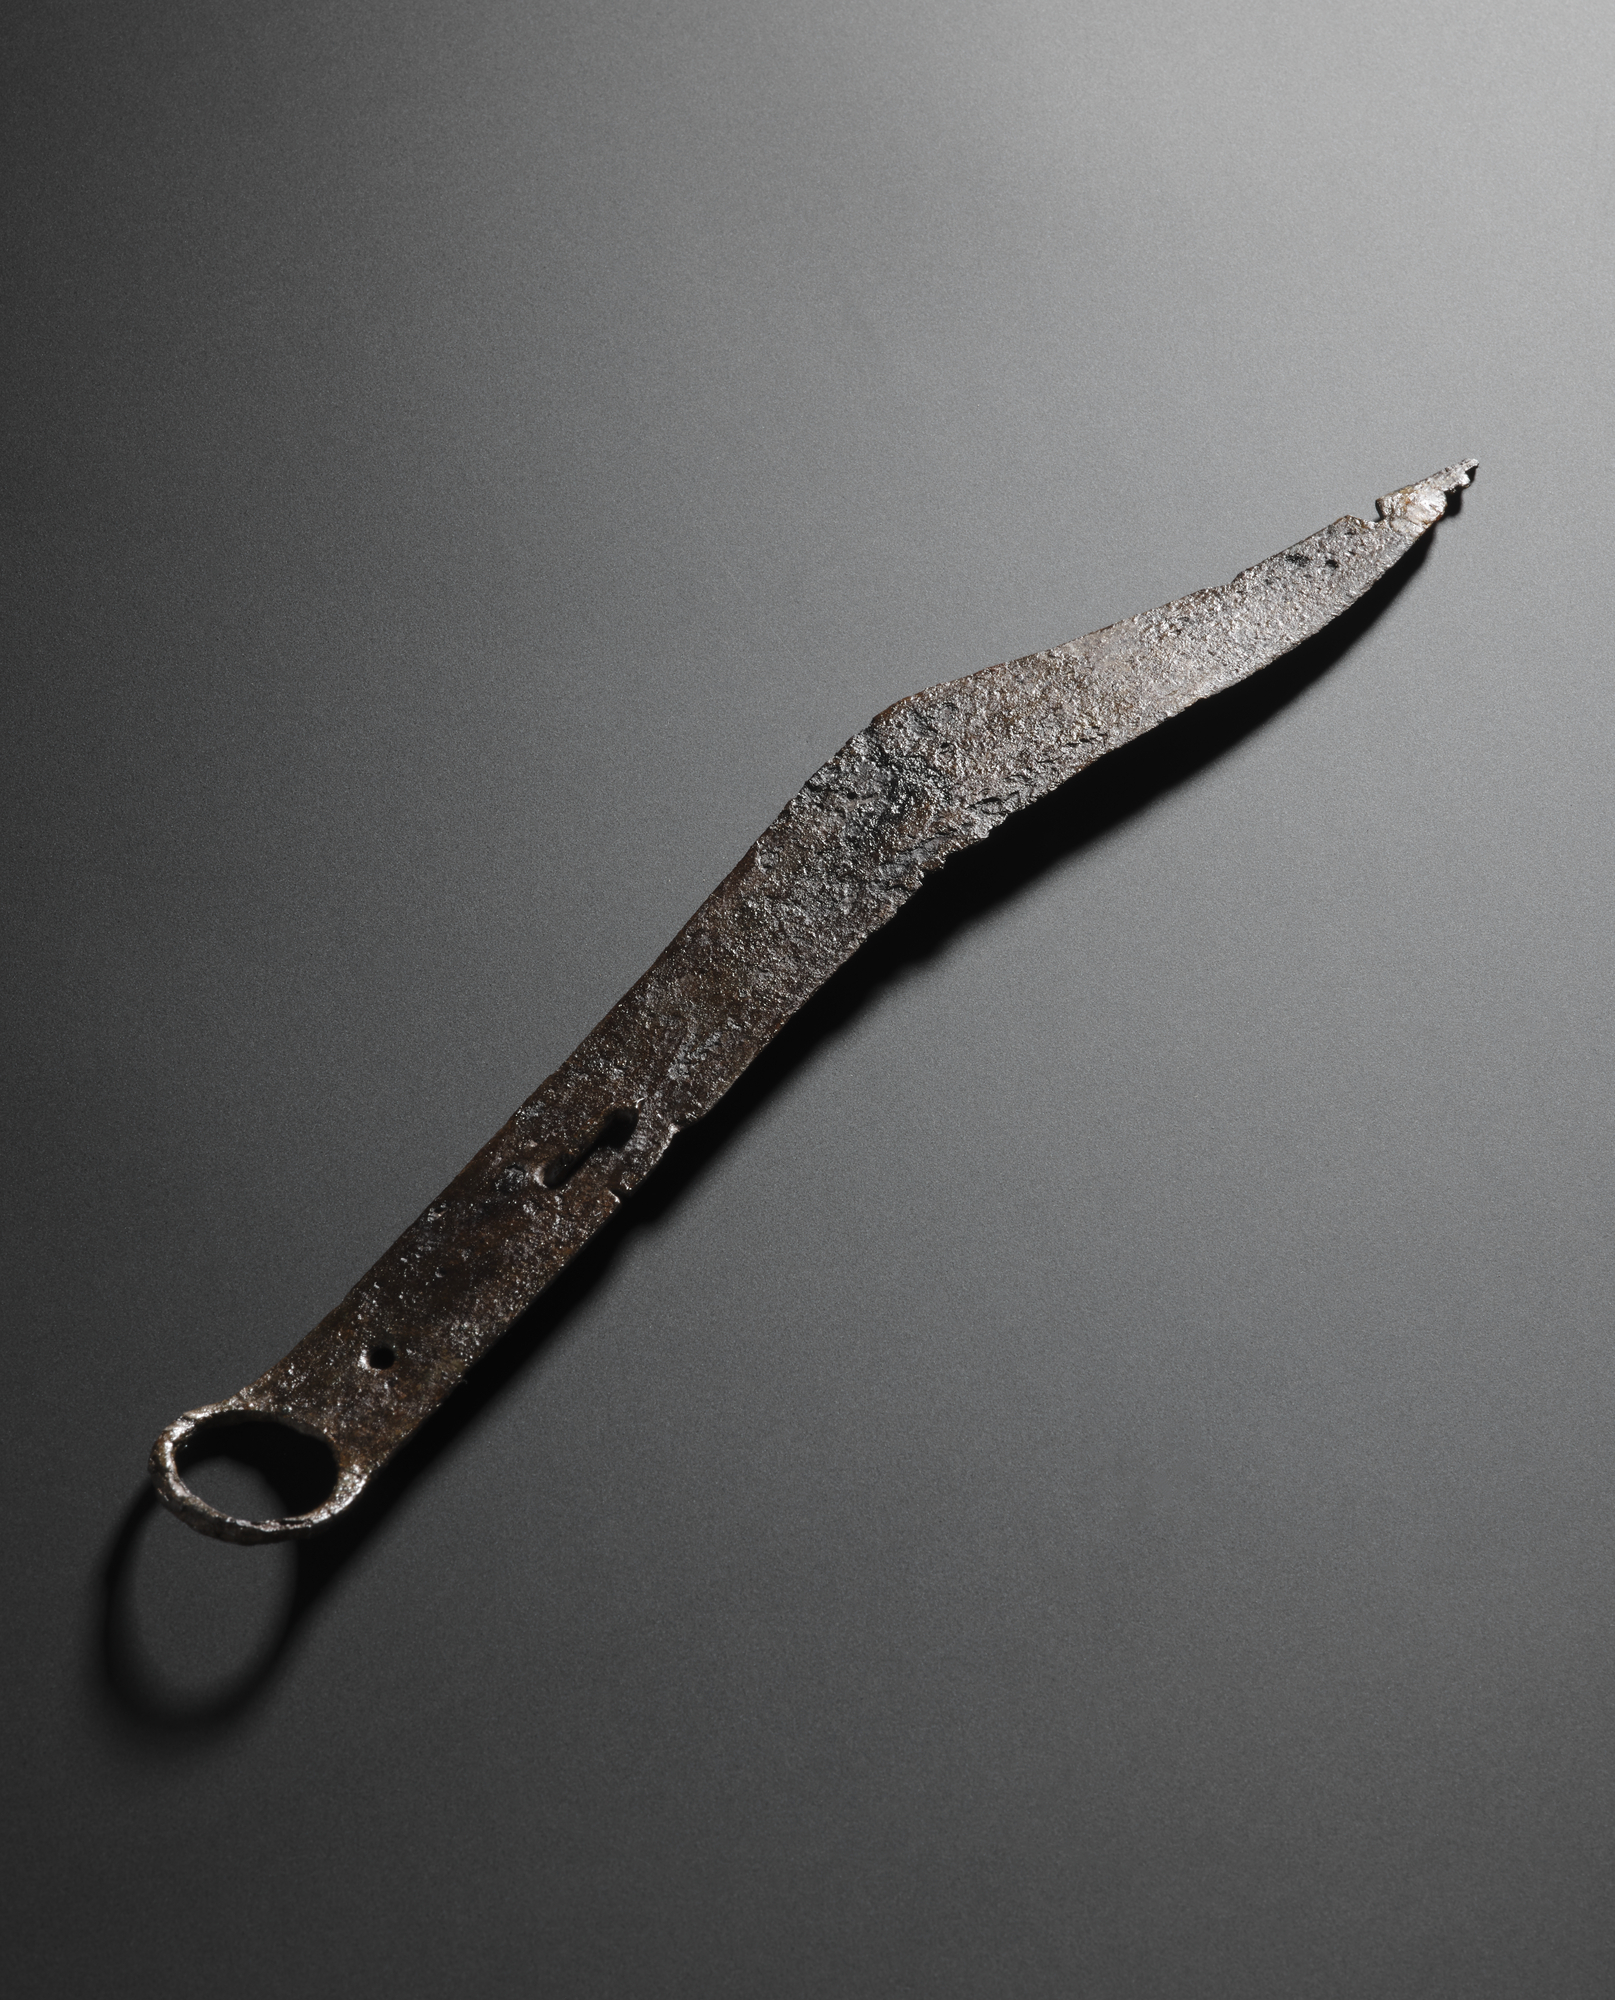 Image of Iron knife with a ring for suspension at the end, from the Roman site at Newstead © National Museums Scotland